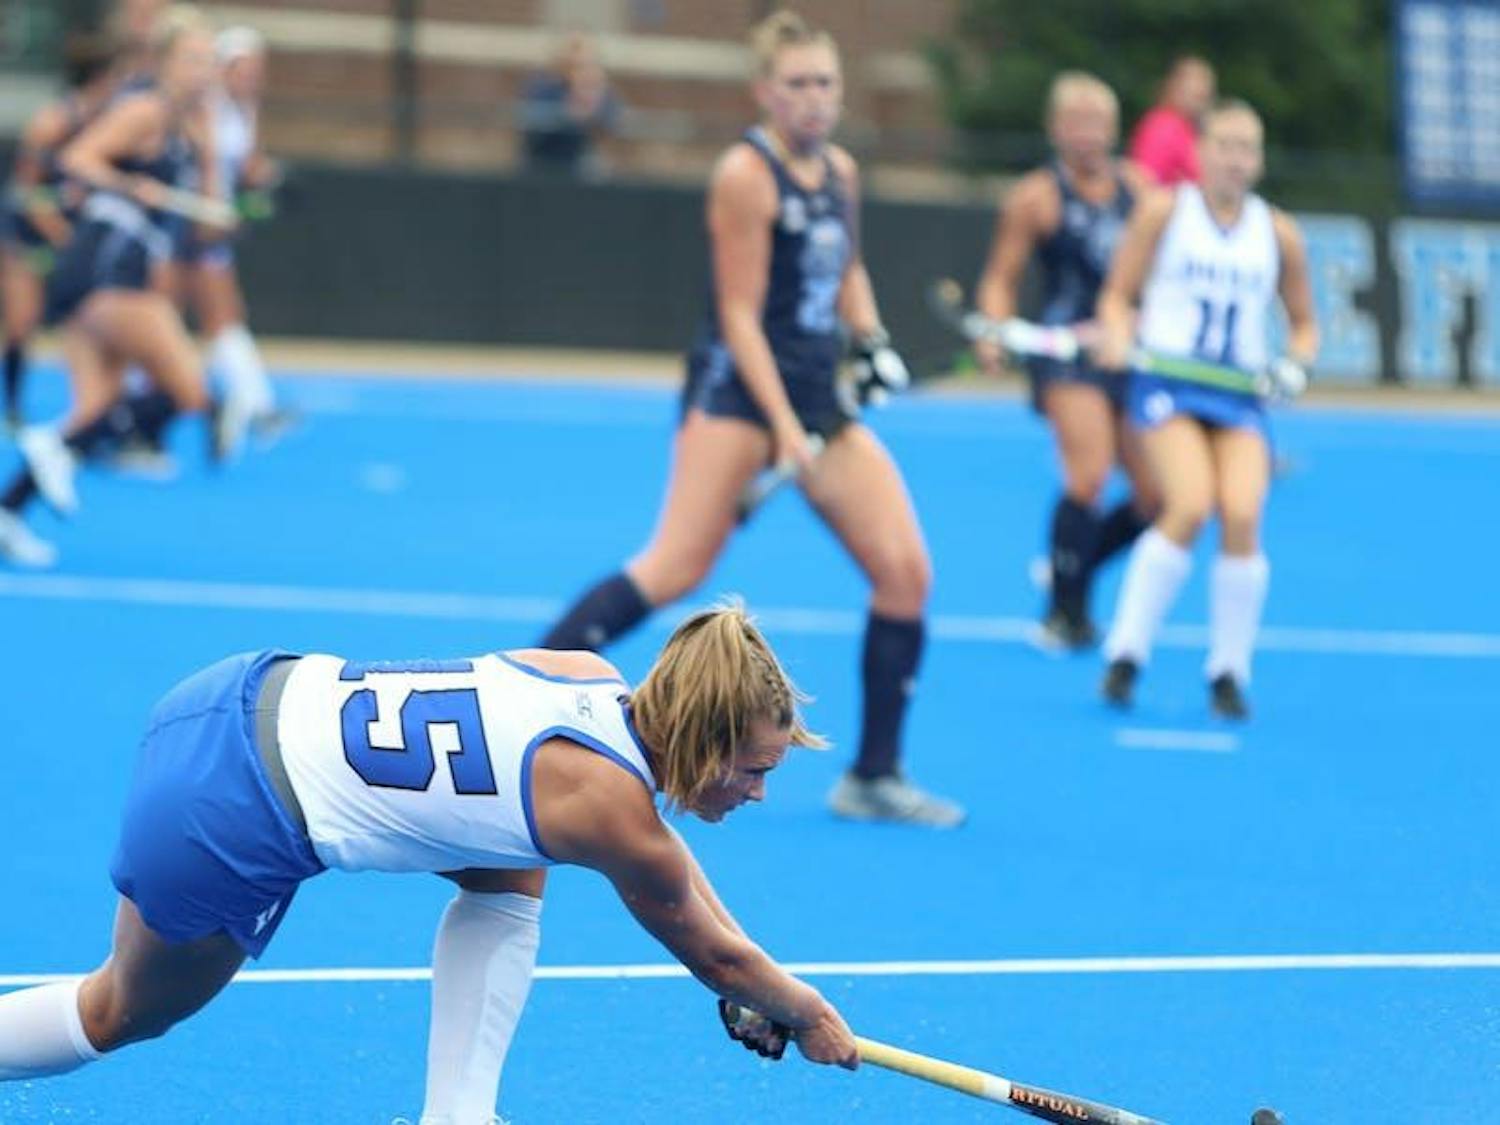 Freshman back Josephine Veen passes the ball up against Old Dominion.